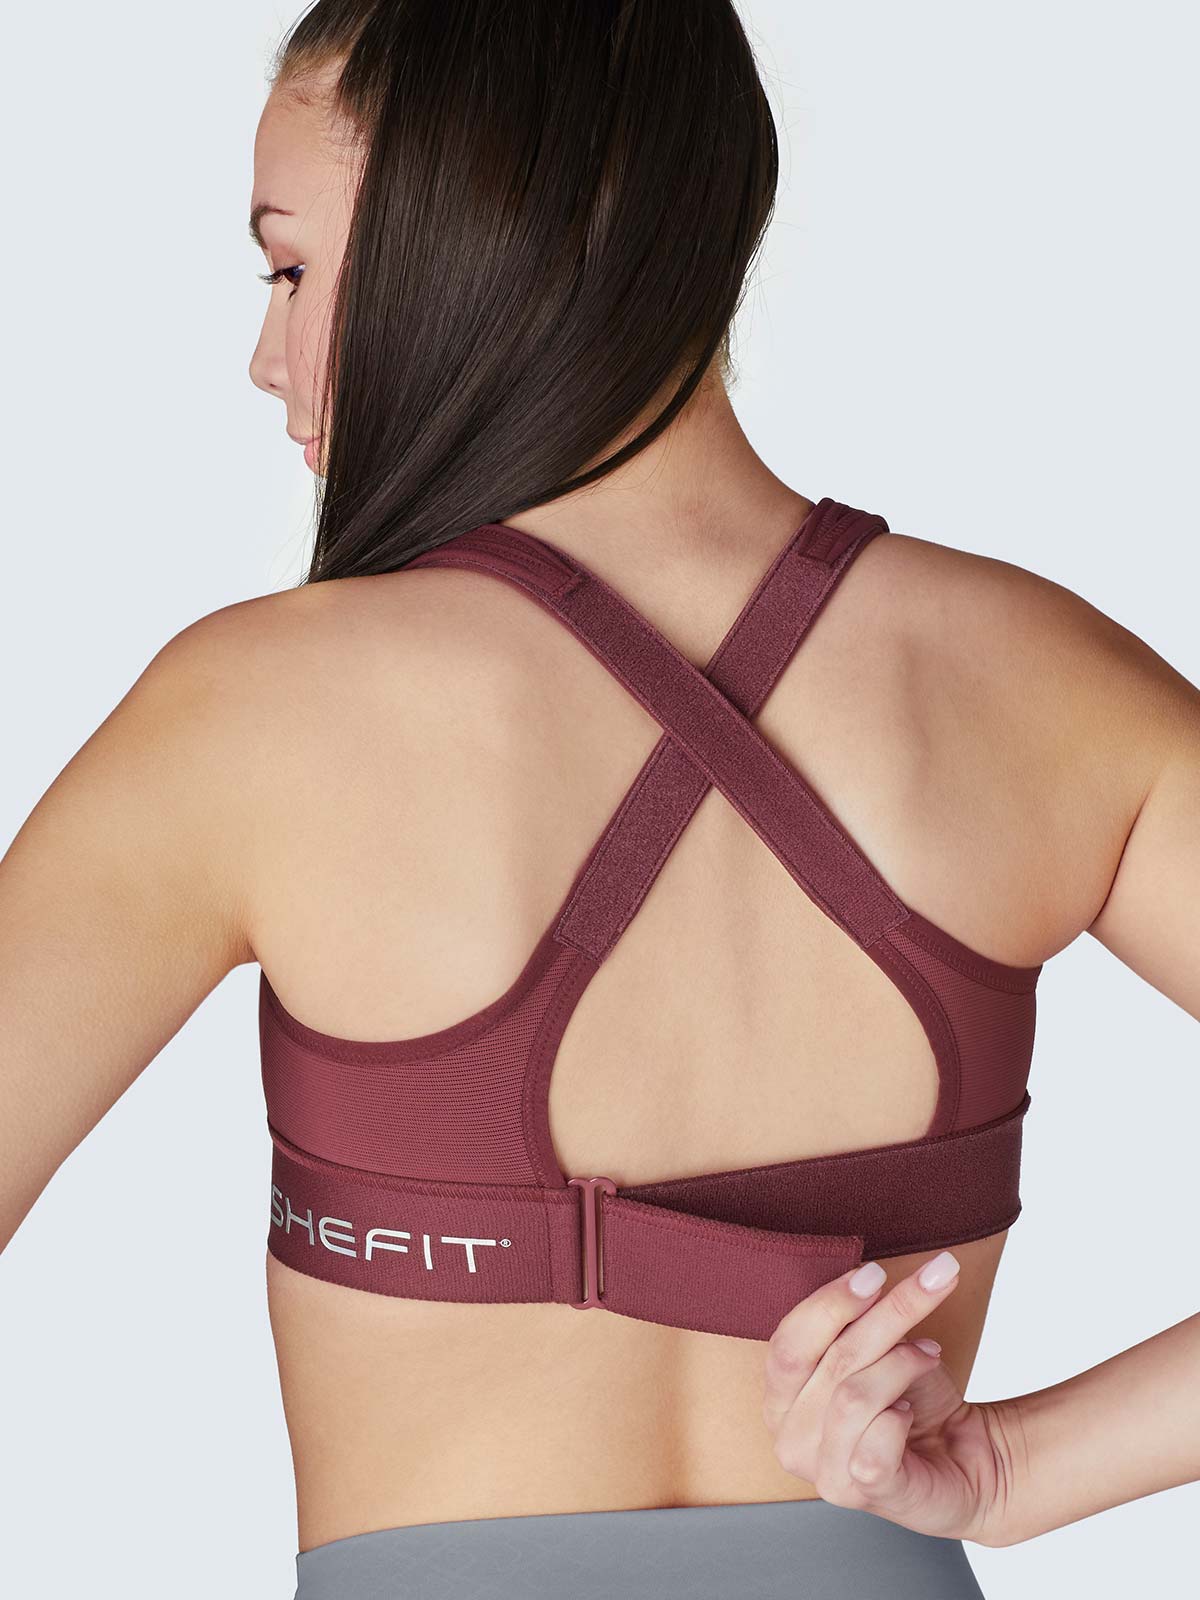 Lot of SHEFIT 1Luxe ULTIMATE Sports Bras for Hillary - Athletic apparel